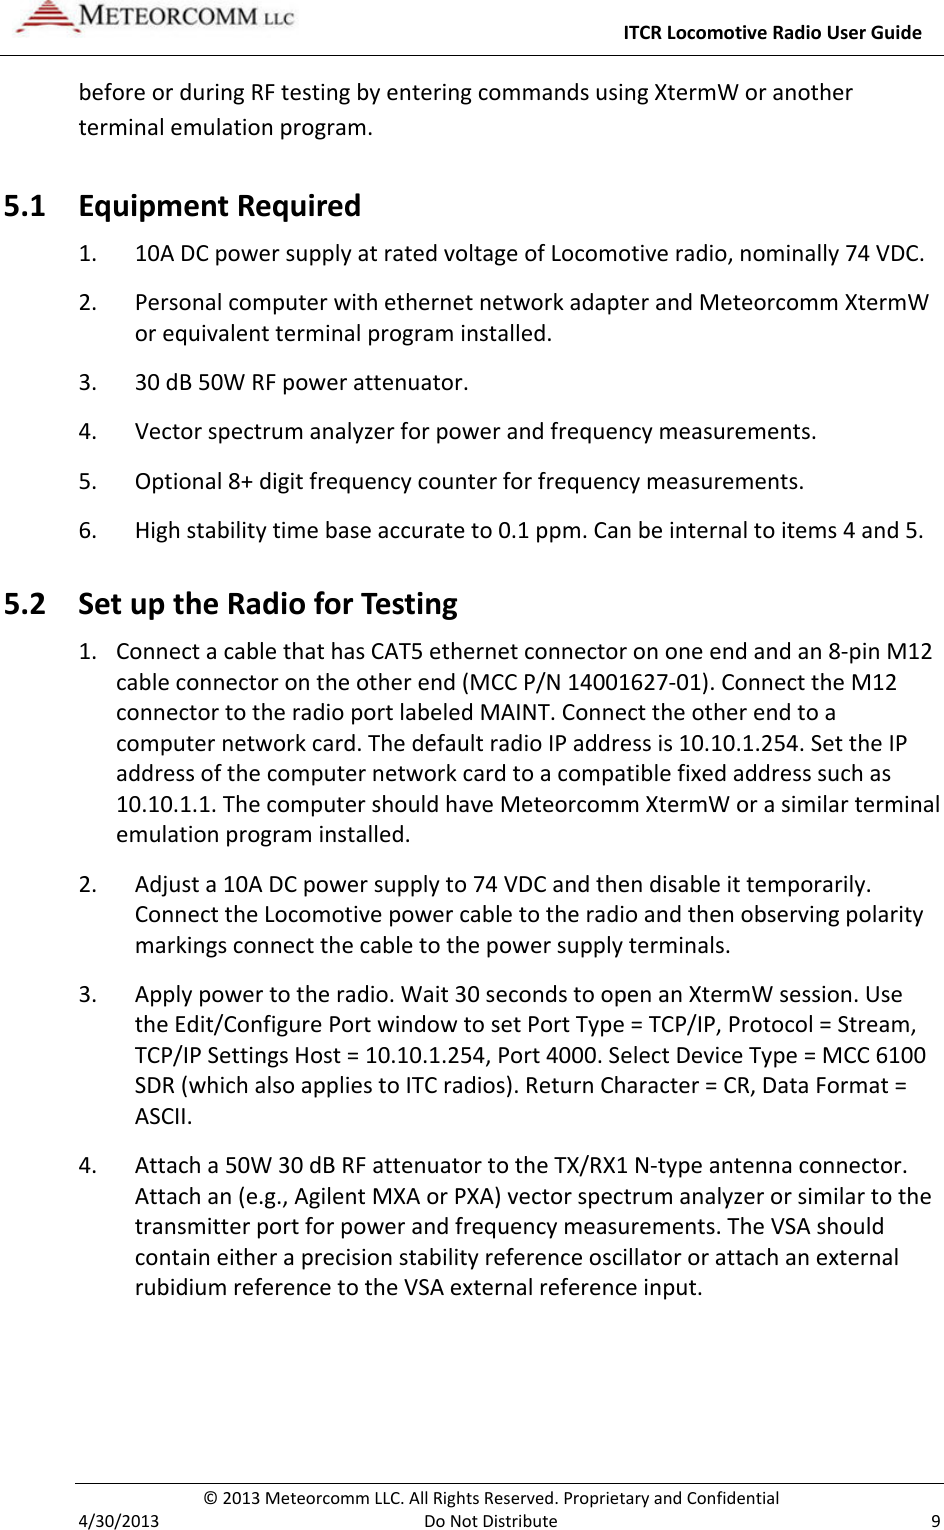     ITCR Locomotive Radio User Guide  © 2013 Meteorcomm LLC. All Rights Reserved. Proprietary and Confidential   4/30/2013  Do Not Distribute  9 before or during RF testing by entering commands using XtermW or another terminal emulation program.  5.1 Equipment Required 1. 10A DC power supply at rated voltage of Locomotive radio, nominally 74 VDC. 2. Personal computer with ethernet network adapter and Meteorcomm XtermW or equivalent terminal program installed. 3. 30 dB 50W RF power attenuator. 4. Vector spectrum analyzer for power and frequency measurements. 5. Optional 8+ digit frequency counter for frequency measurements. 6. High stability time base accurate to 0.1 ppm. Can be internal to items 4 and 5. 5.2 Set up the Radio for Testing 1. Connect a cable that has CAT5 ethernet connector on one end and an 8-pin M12 cable connector on the other end (MCC P/N 14001627-01). Connect the M12 connector to the radio port labeled MAINT. Connect the other end to a computer network card. The default radio IP address is 10.10.1.254. Set the IP address of the computer network card to a compatible fixed address such as 10.10.1.1. The computer should have Meteorcomm XtermW or a similar terminal emulation program installed.    2. Adjust a 10A DC power supply to 74 VDC and then disable it temporarily. Connect the Locomotive power cable to the radio and then observing polarity markings connect the cable to the power supply terminals. 3. Apply power to the radio. Wait 30 seconds to open an XtermW session. Use the Edit/Configure Port window to set Port Type = TCP/IP, Protocol = Stream, TCP/IP Settings Host = 10.10.1.254, Port 4000. Select Device Type = MCC 6100 SDR (which also applies to ITC radios). Return Character = CR, Data Format = ASCII. 4. Attach a 50W 30 dB RF attenuator to the TX/RX1 N-type antenna connector. Attach an (e.g., Agilent MXA or PXA) vector spectrum analyzer or similar to the transmitter port for power and frequency measurements. The VSA should contain either a precision stability reference oscillator or attach an external rubidium reference to the VSA external reference input. 